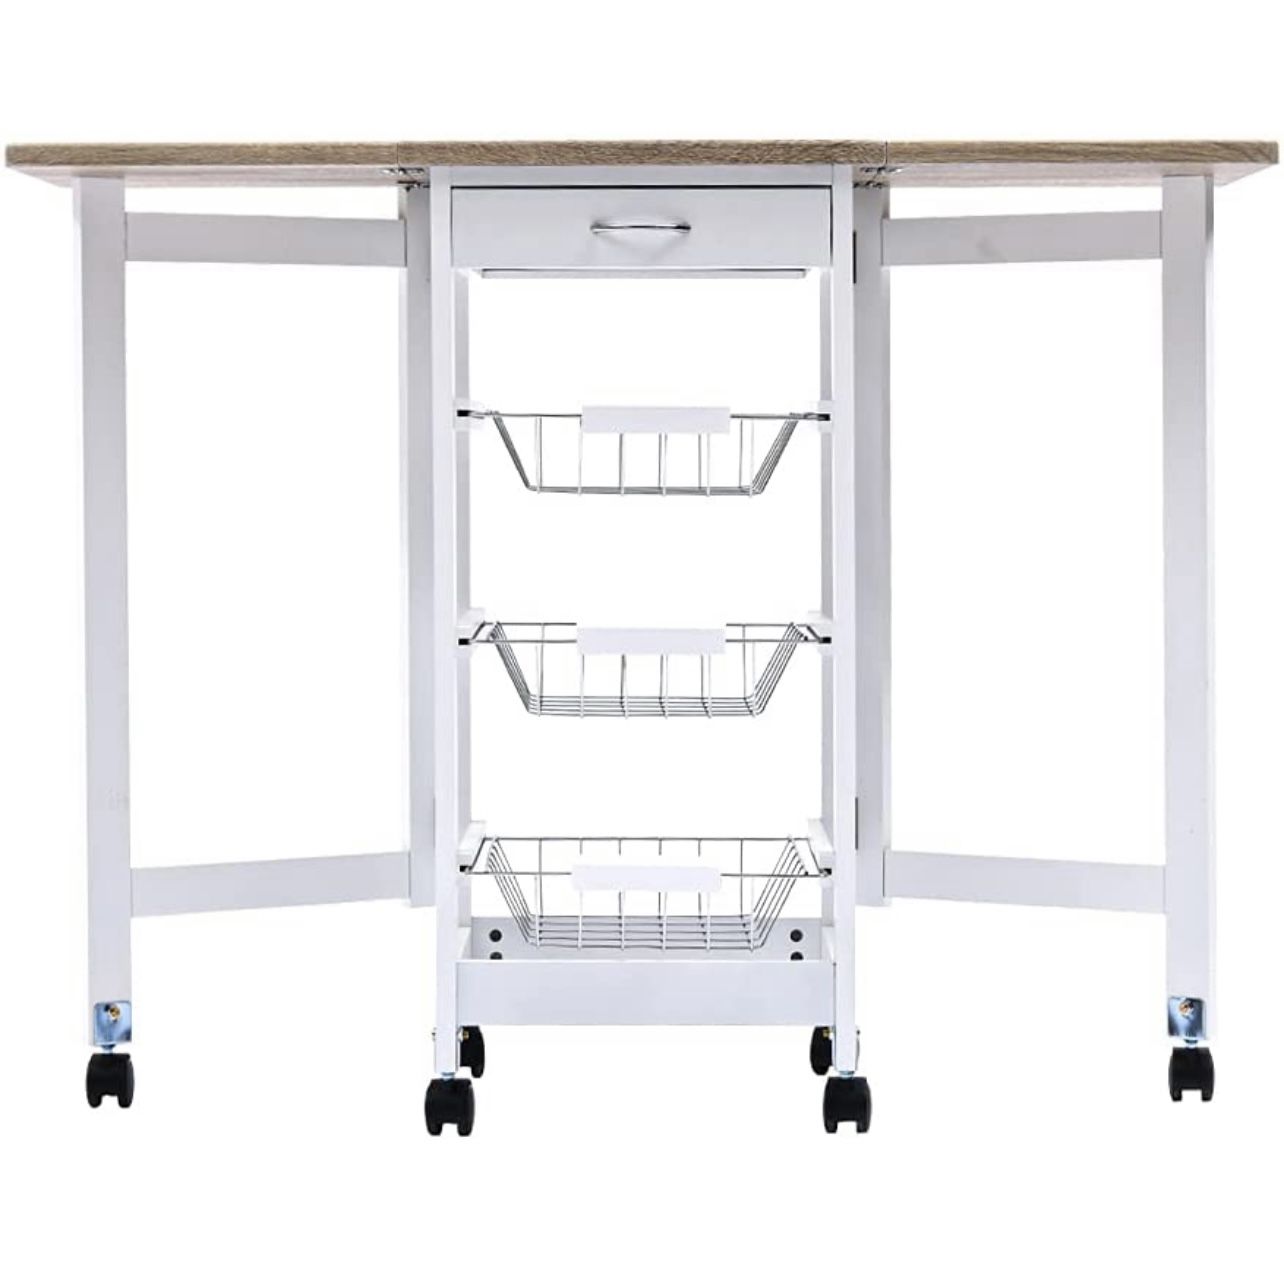 5 in 1 Kitchen Island with 3 Spice Rack & 1 Drawer, Portable Folding Kitchen Island Storage W/Wheels, Pantry Cabinets Bar Cart W/Baskets, Durable (Whi